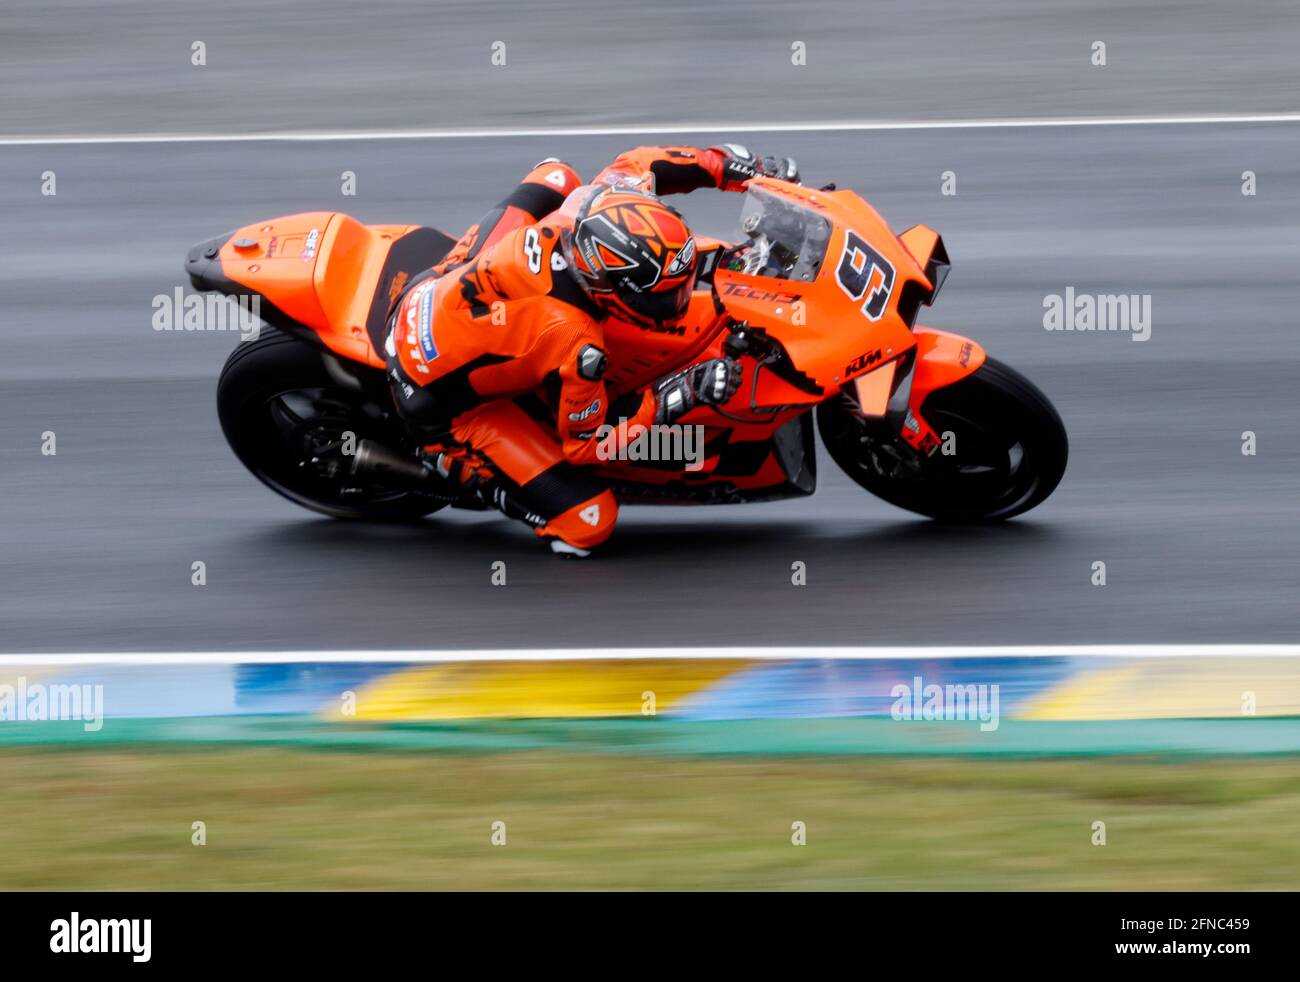 MotoGP - French Grand Prix - Circuit Bugatti, Le Mans, France - May 16,  2021 Tech3 KTM Factory Racing's Danilo Petrucci in action during the MotoGP  race REUTERS/Stephane Mahe Stock Photo - Alamy